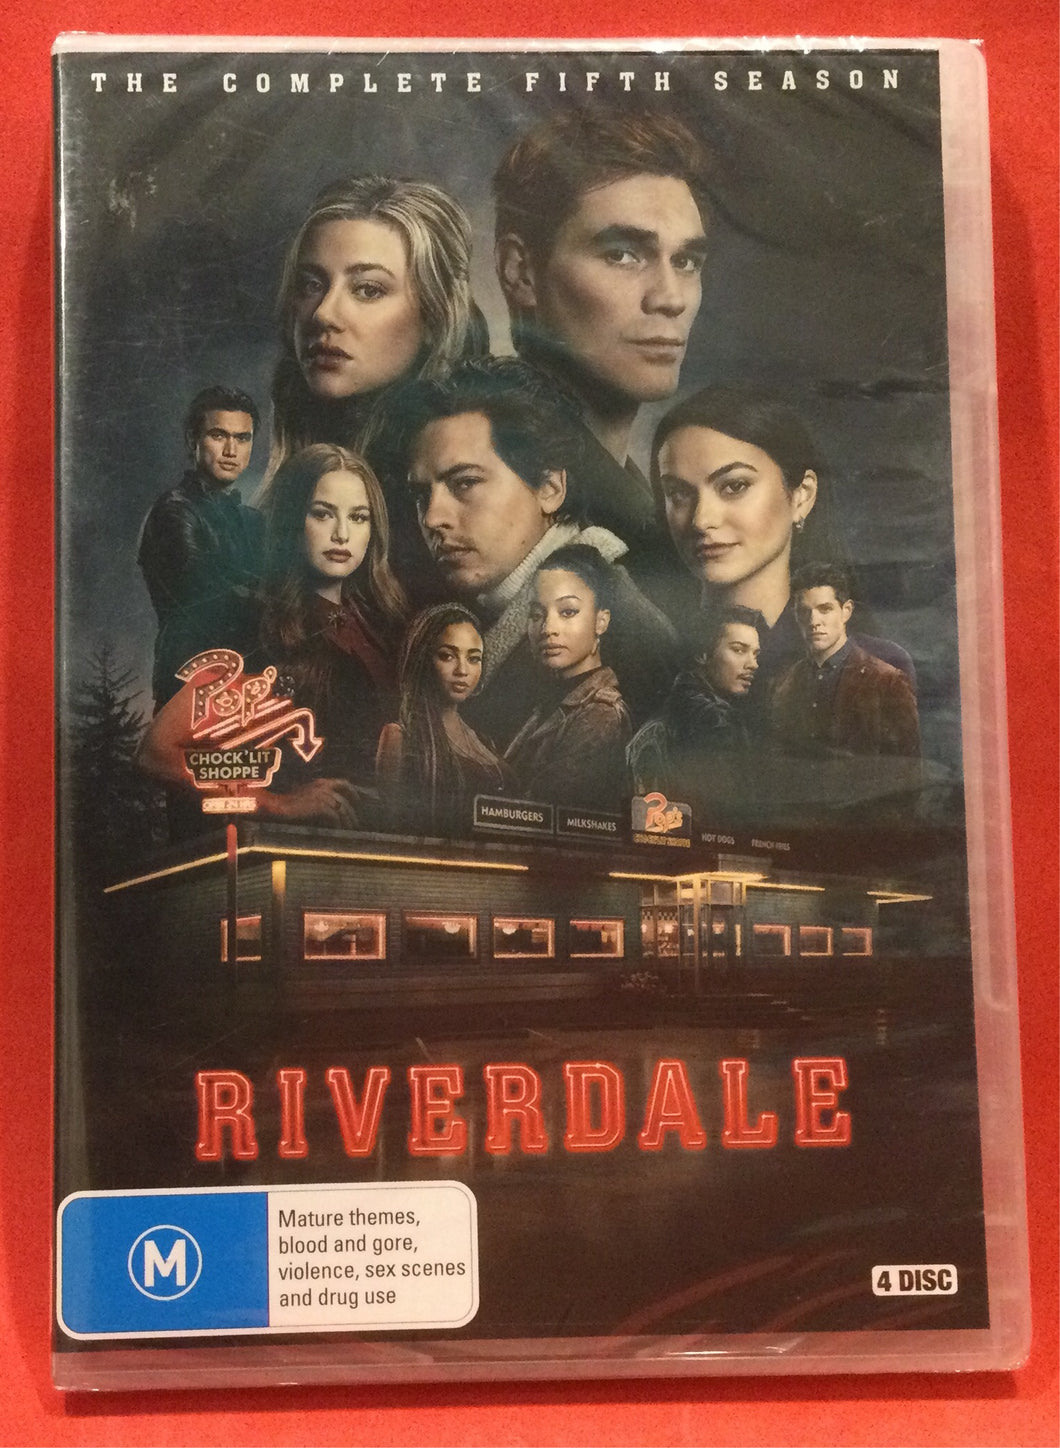 RIVERDALE - COMPLETE FIFTH SEASON - 4 DVD DISCS (SEALED)